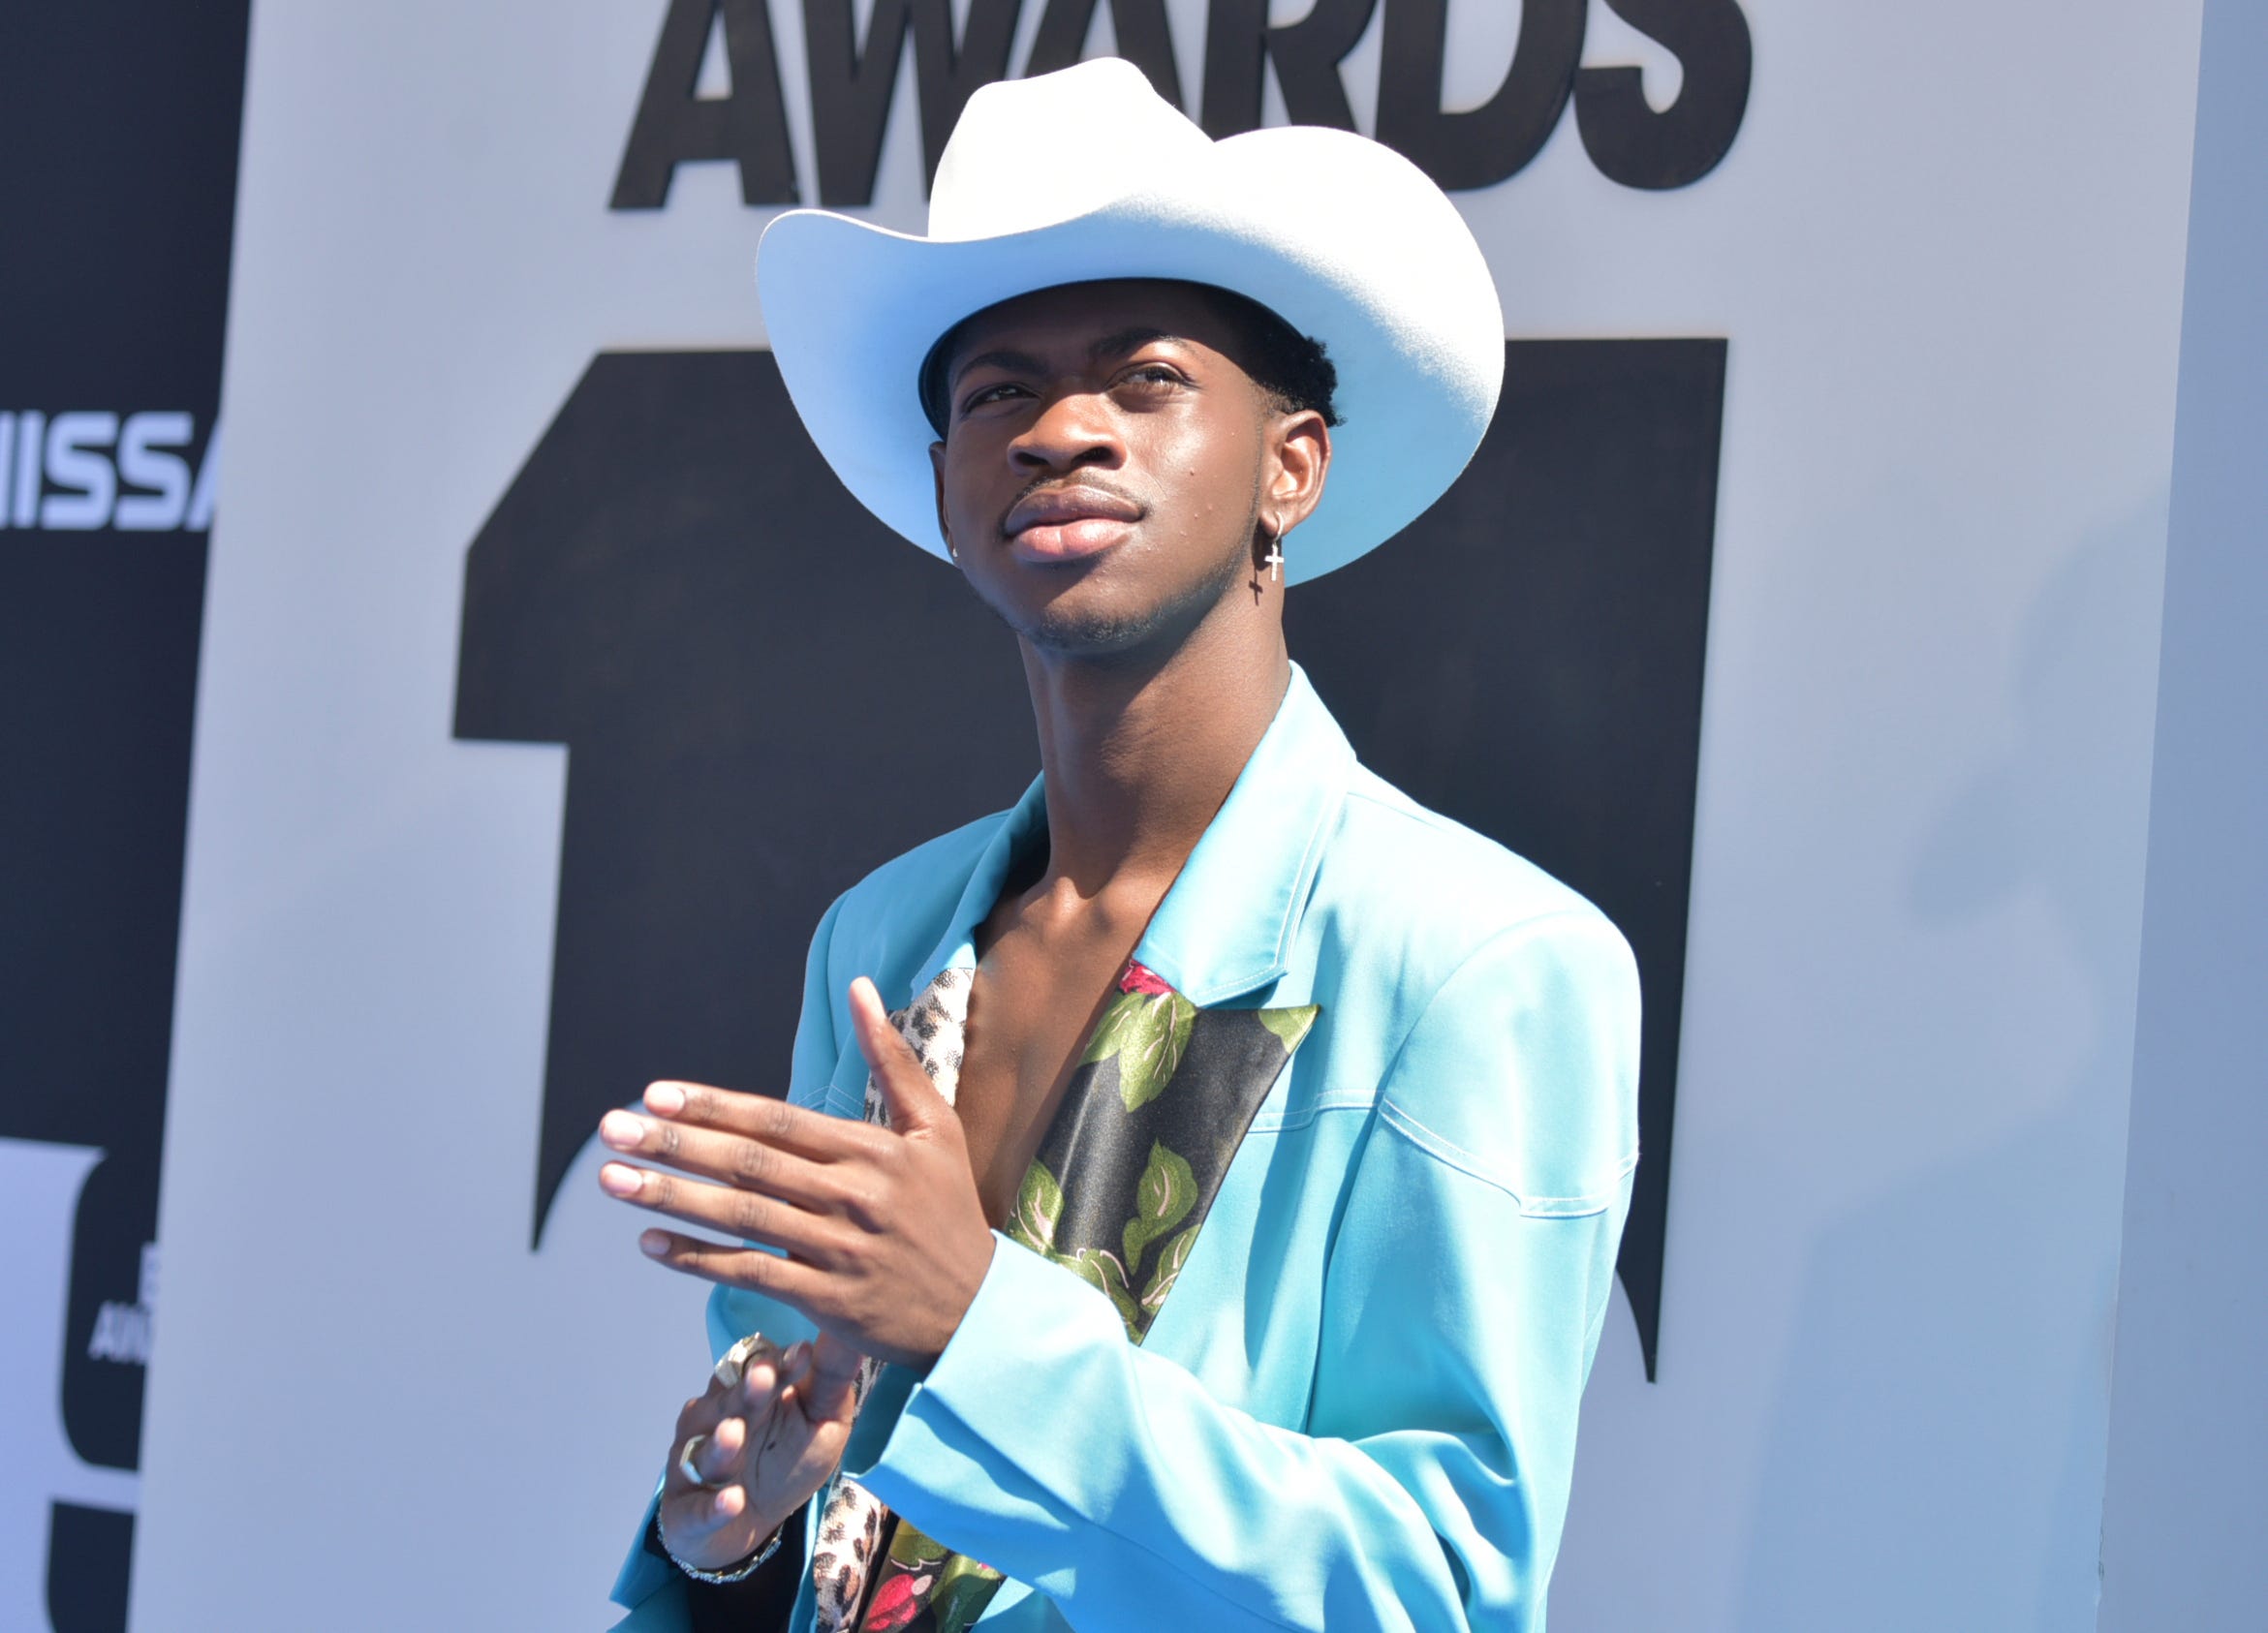 Old Town Road' artist Lil Nas X faces homophobia after coming out